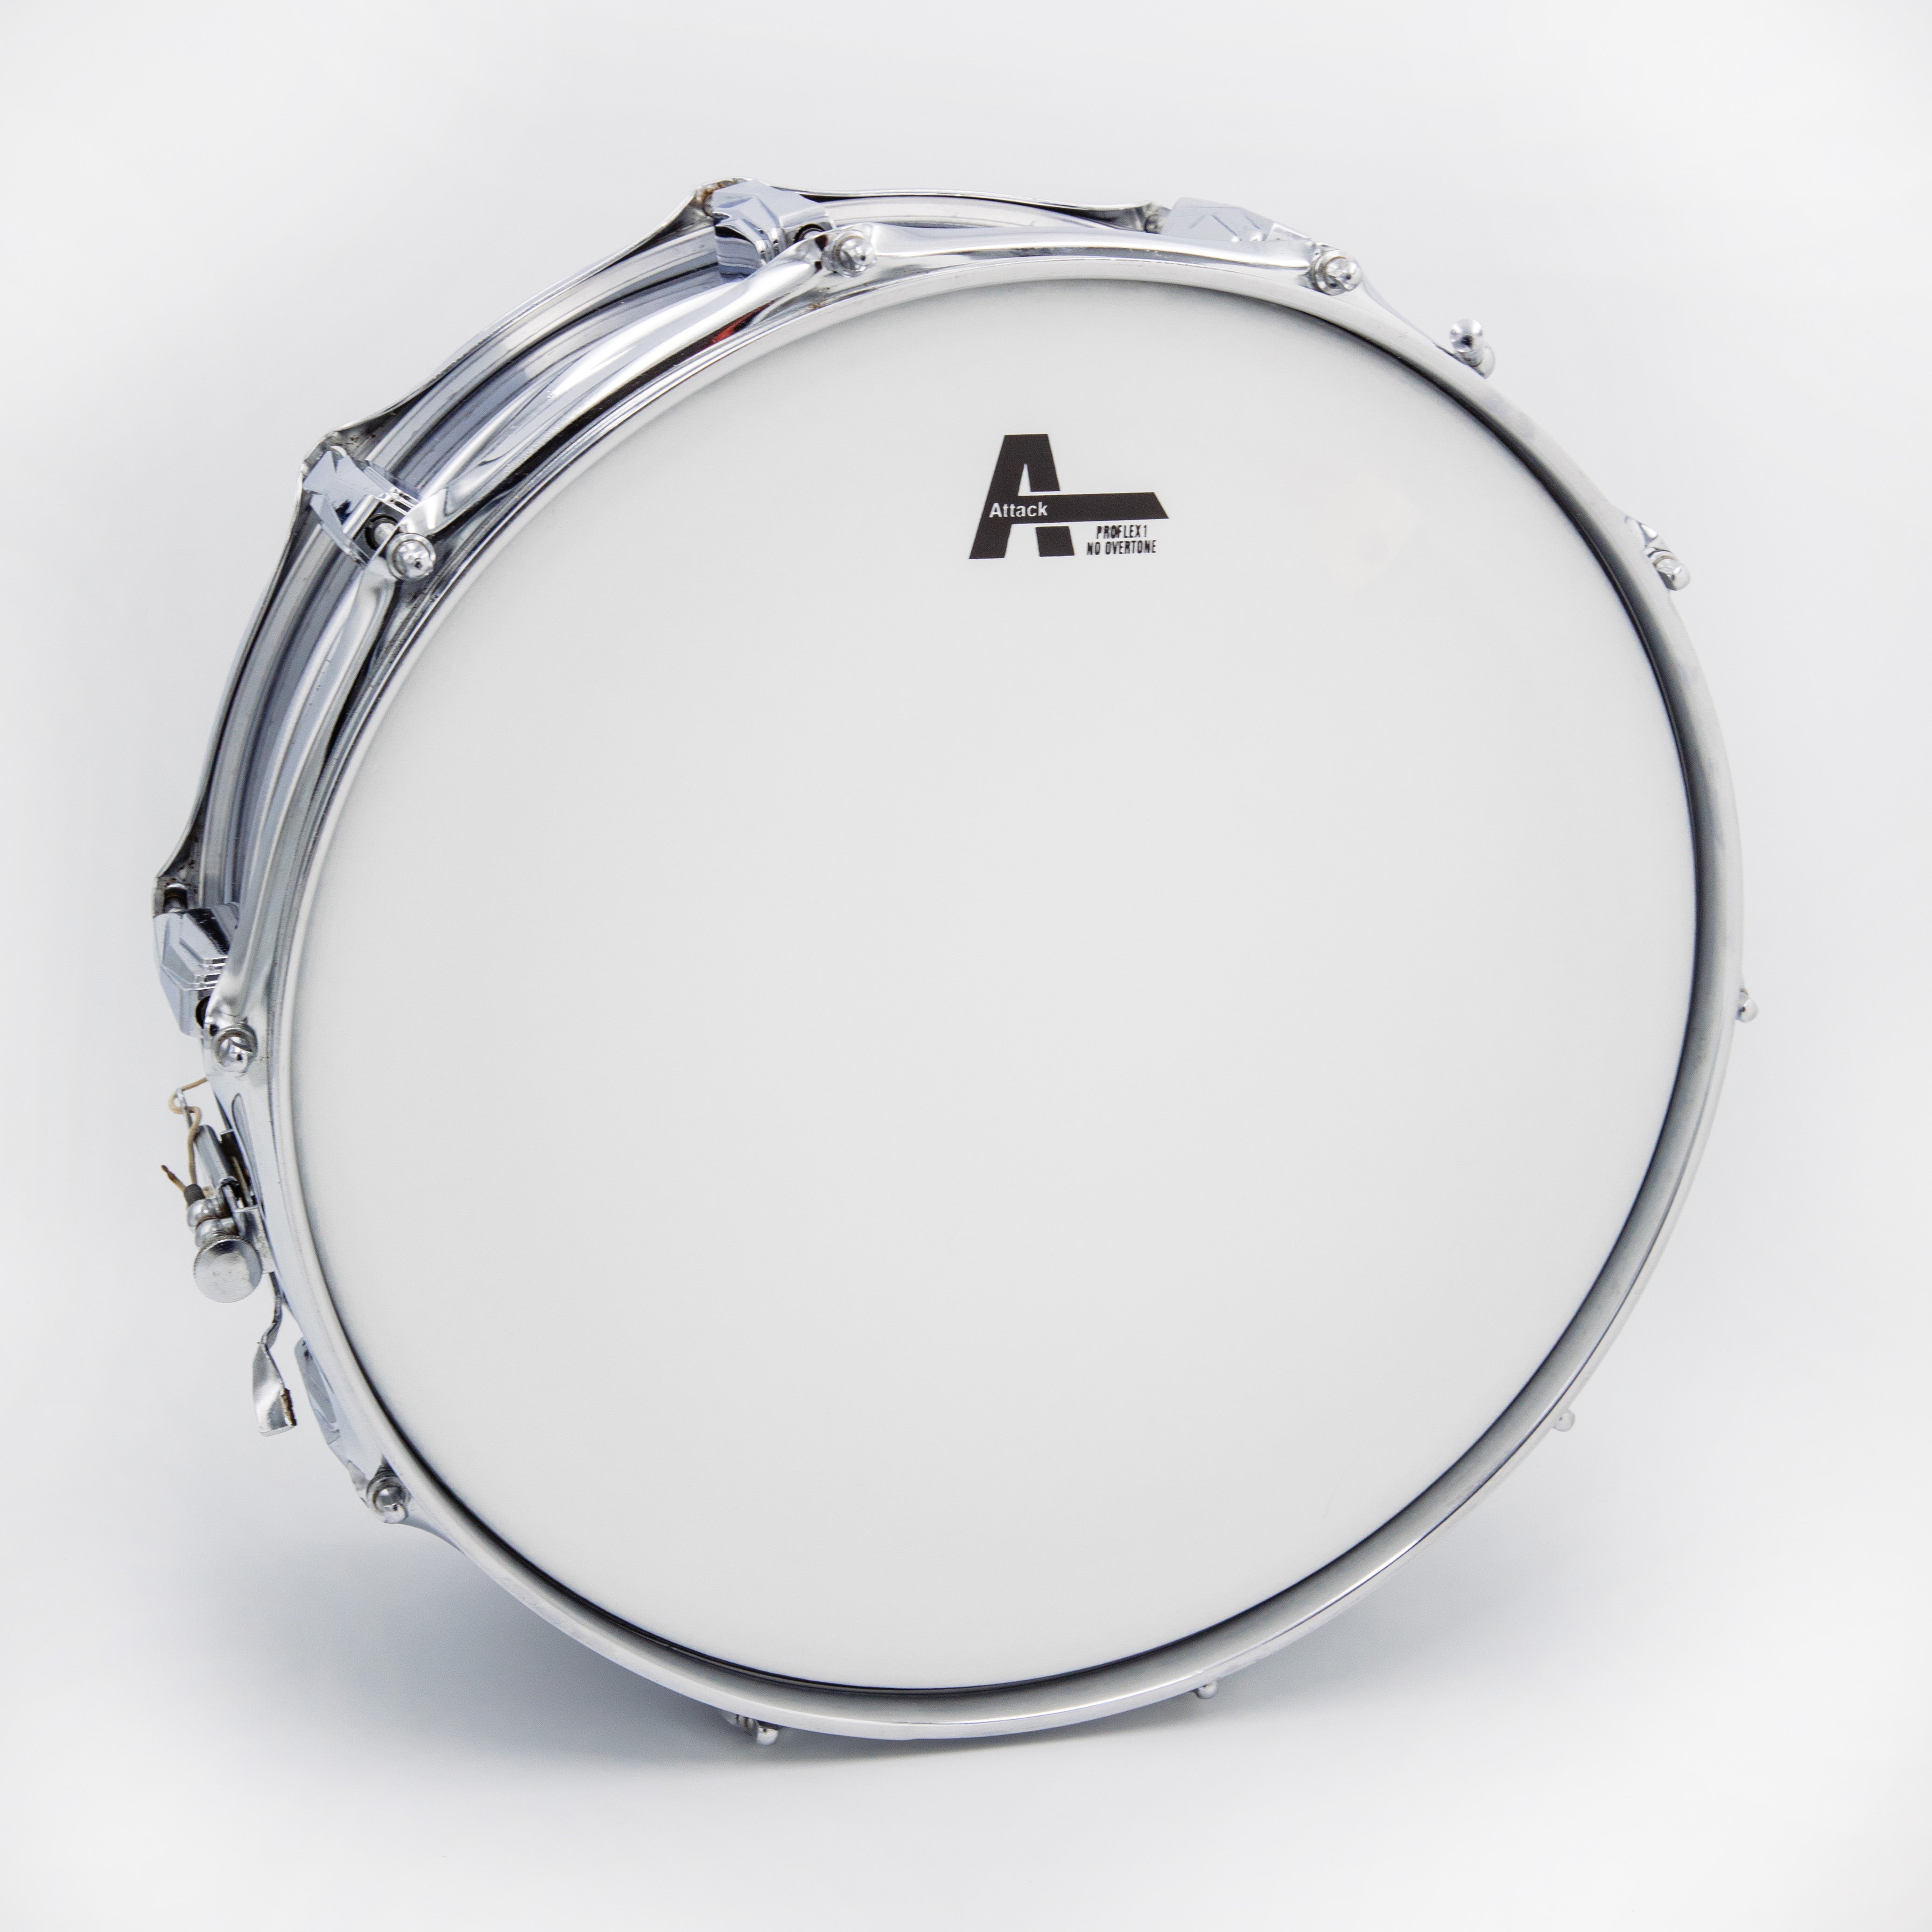 Attack ProFlex 1 14" 1-Ply No Overtone Drumhead - Coated